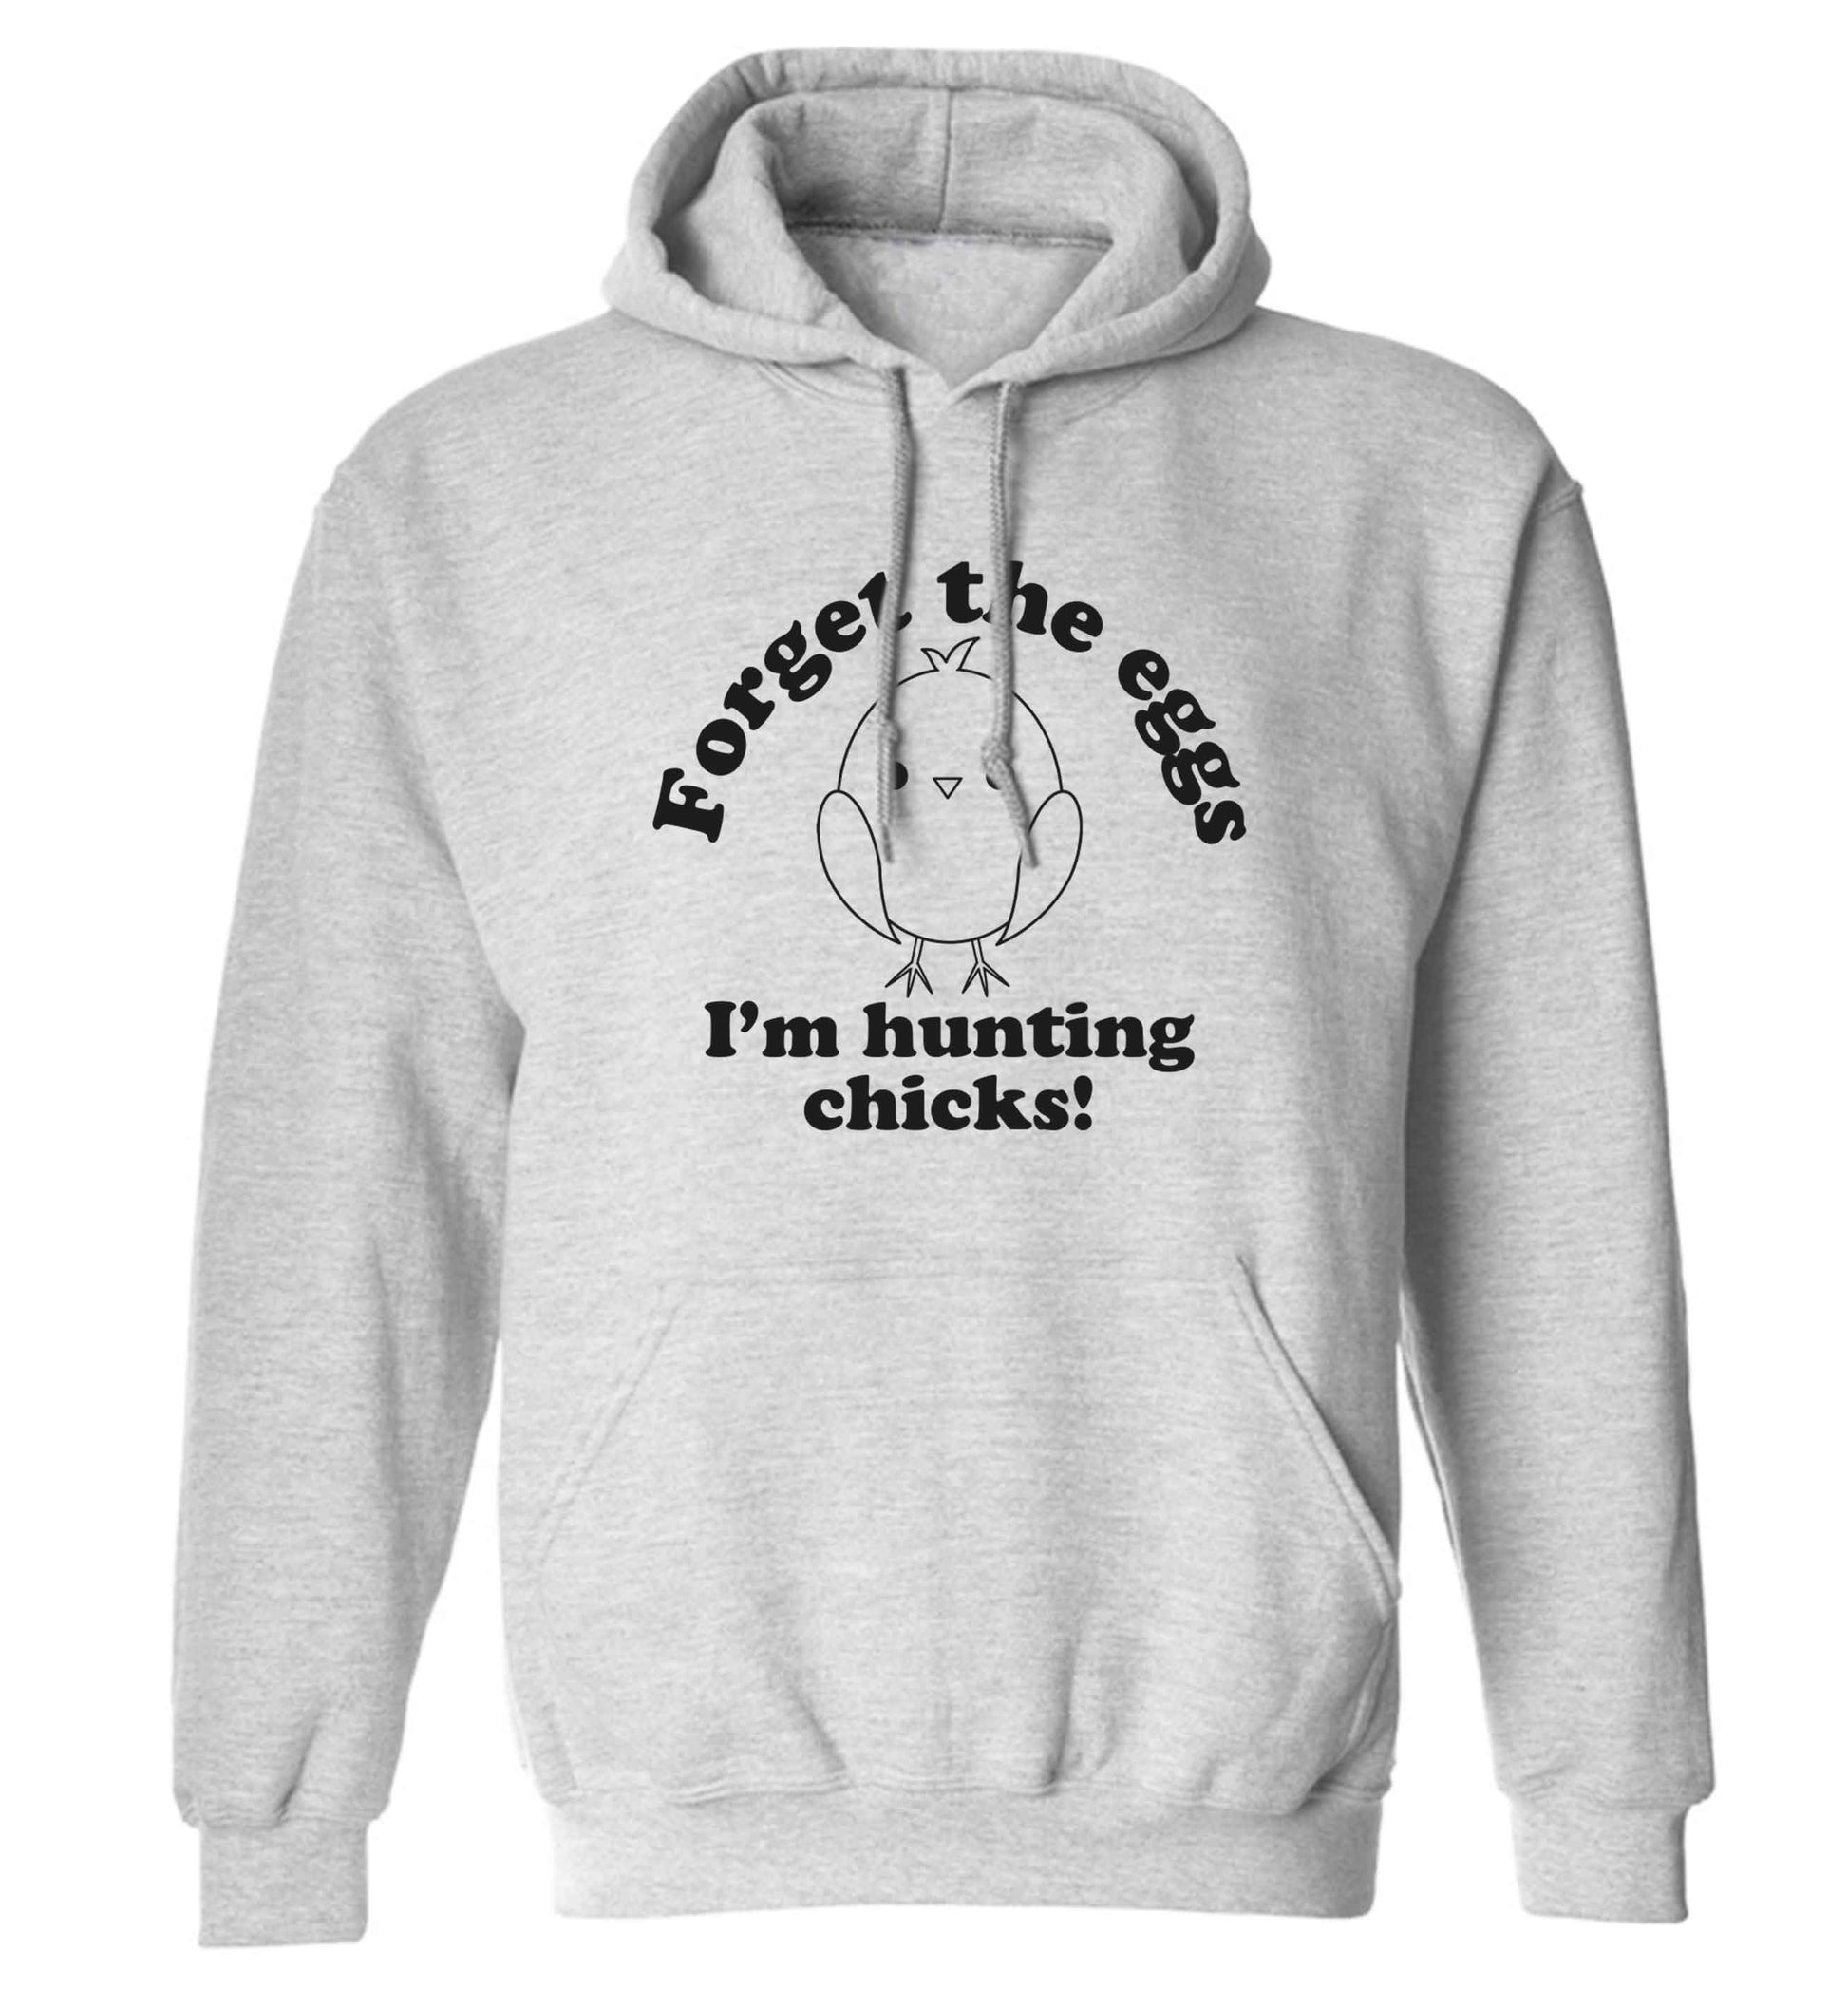 Forget the eggs I'm hunting chicks! adults unisex grey hoodie 2XL